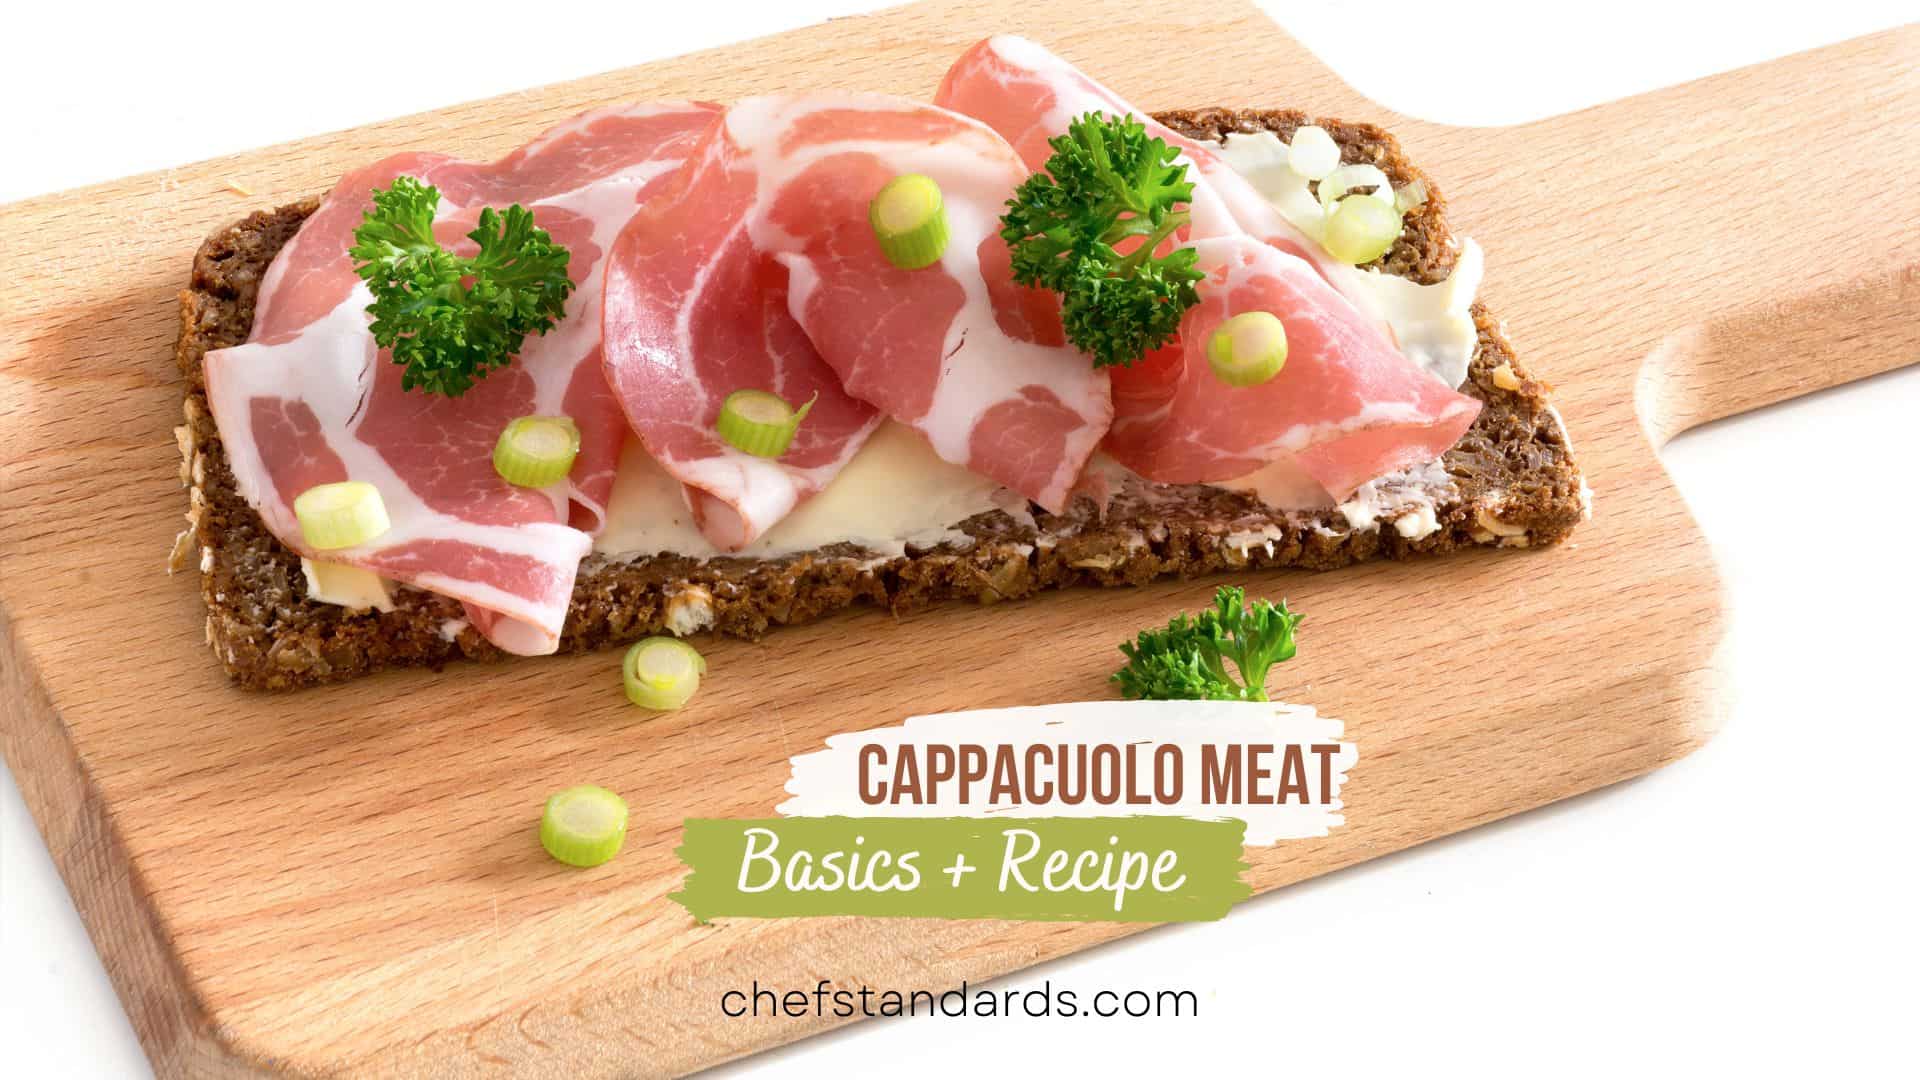 cappacuolo meat on a wooden board